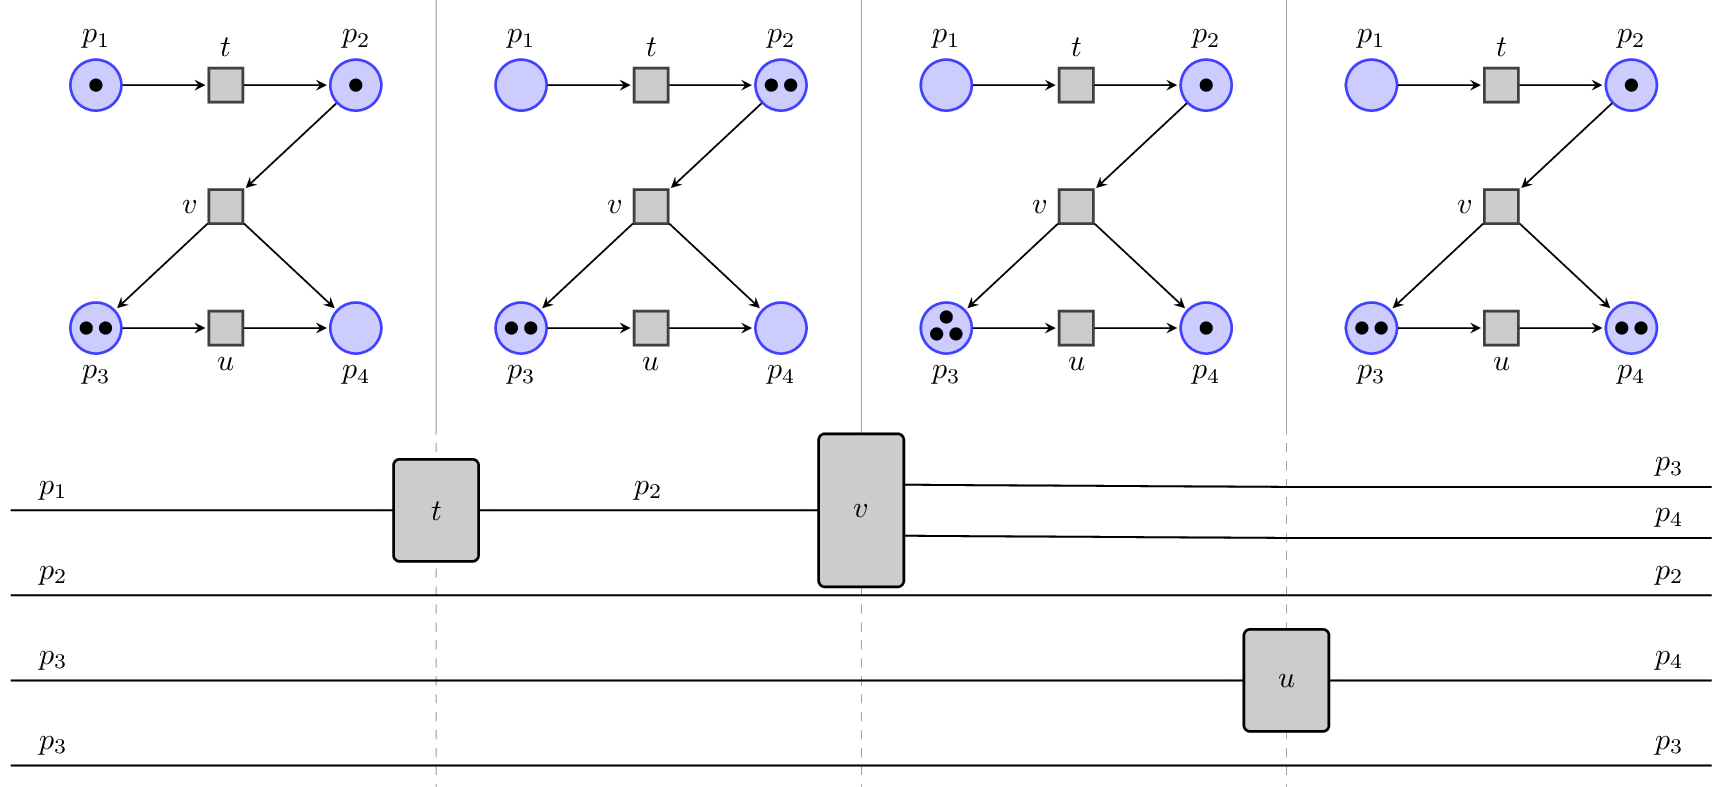 Graphical depiction of how computations in a Petri net correspond to string diagrams in a monoidal category.